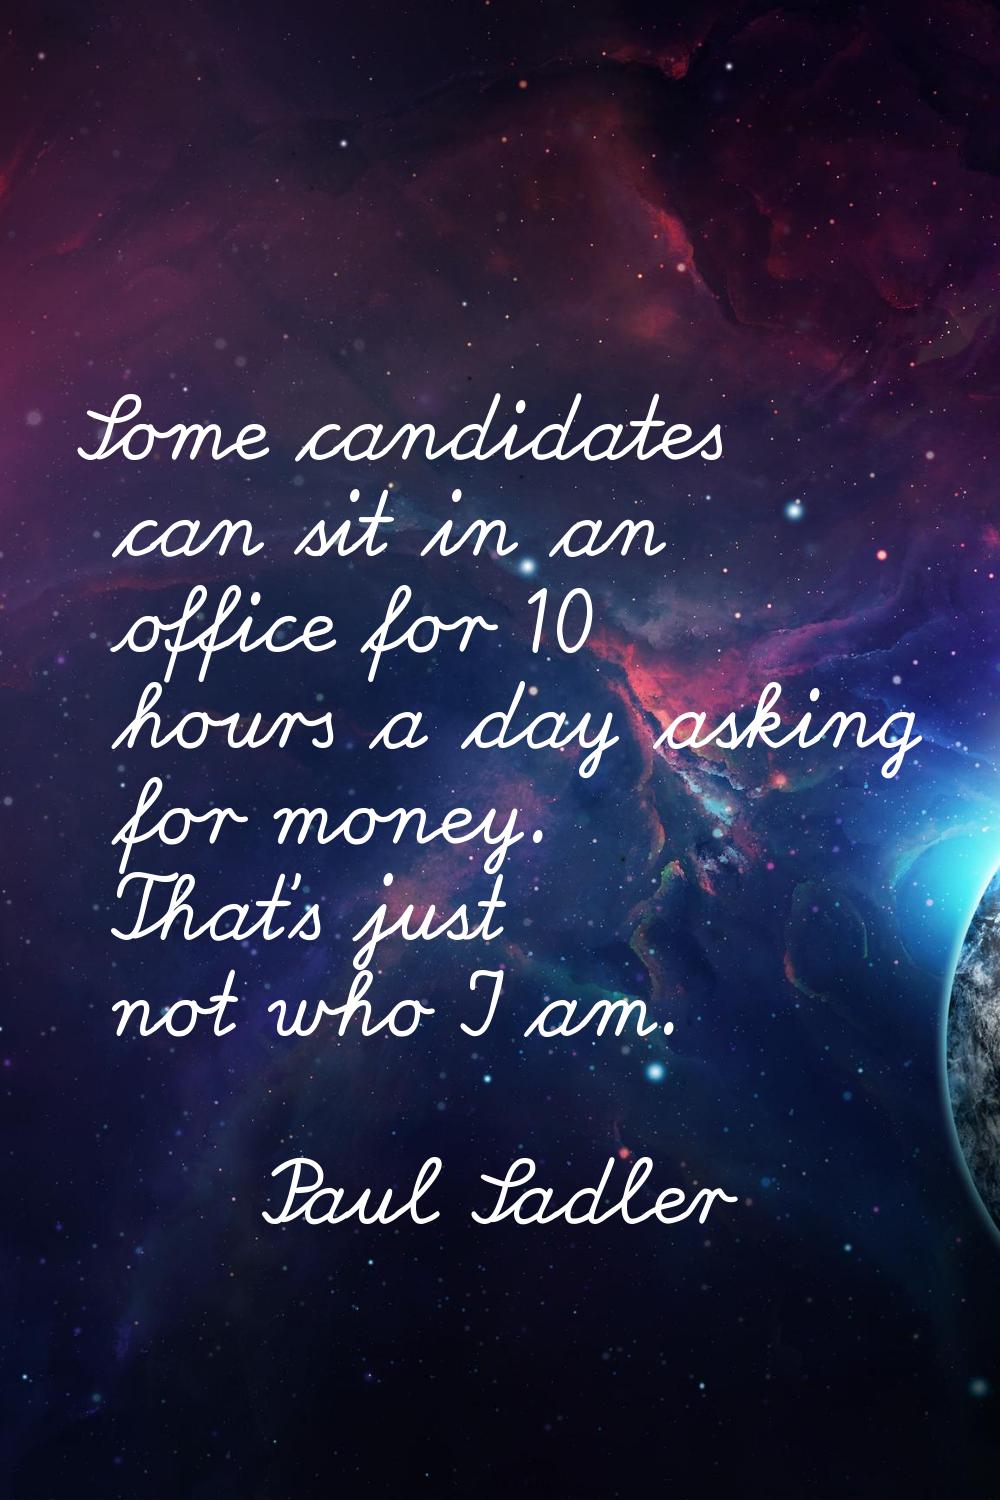 Some candidates can sit in an office for 10 hours a day asking for money. That's just not who I am.